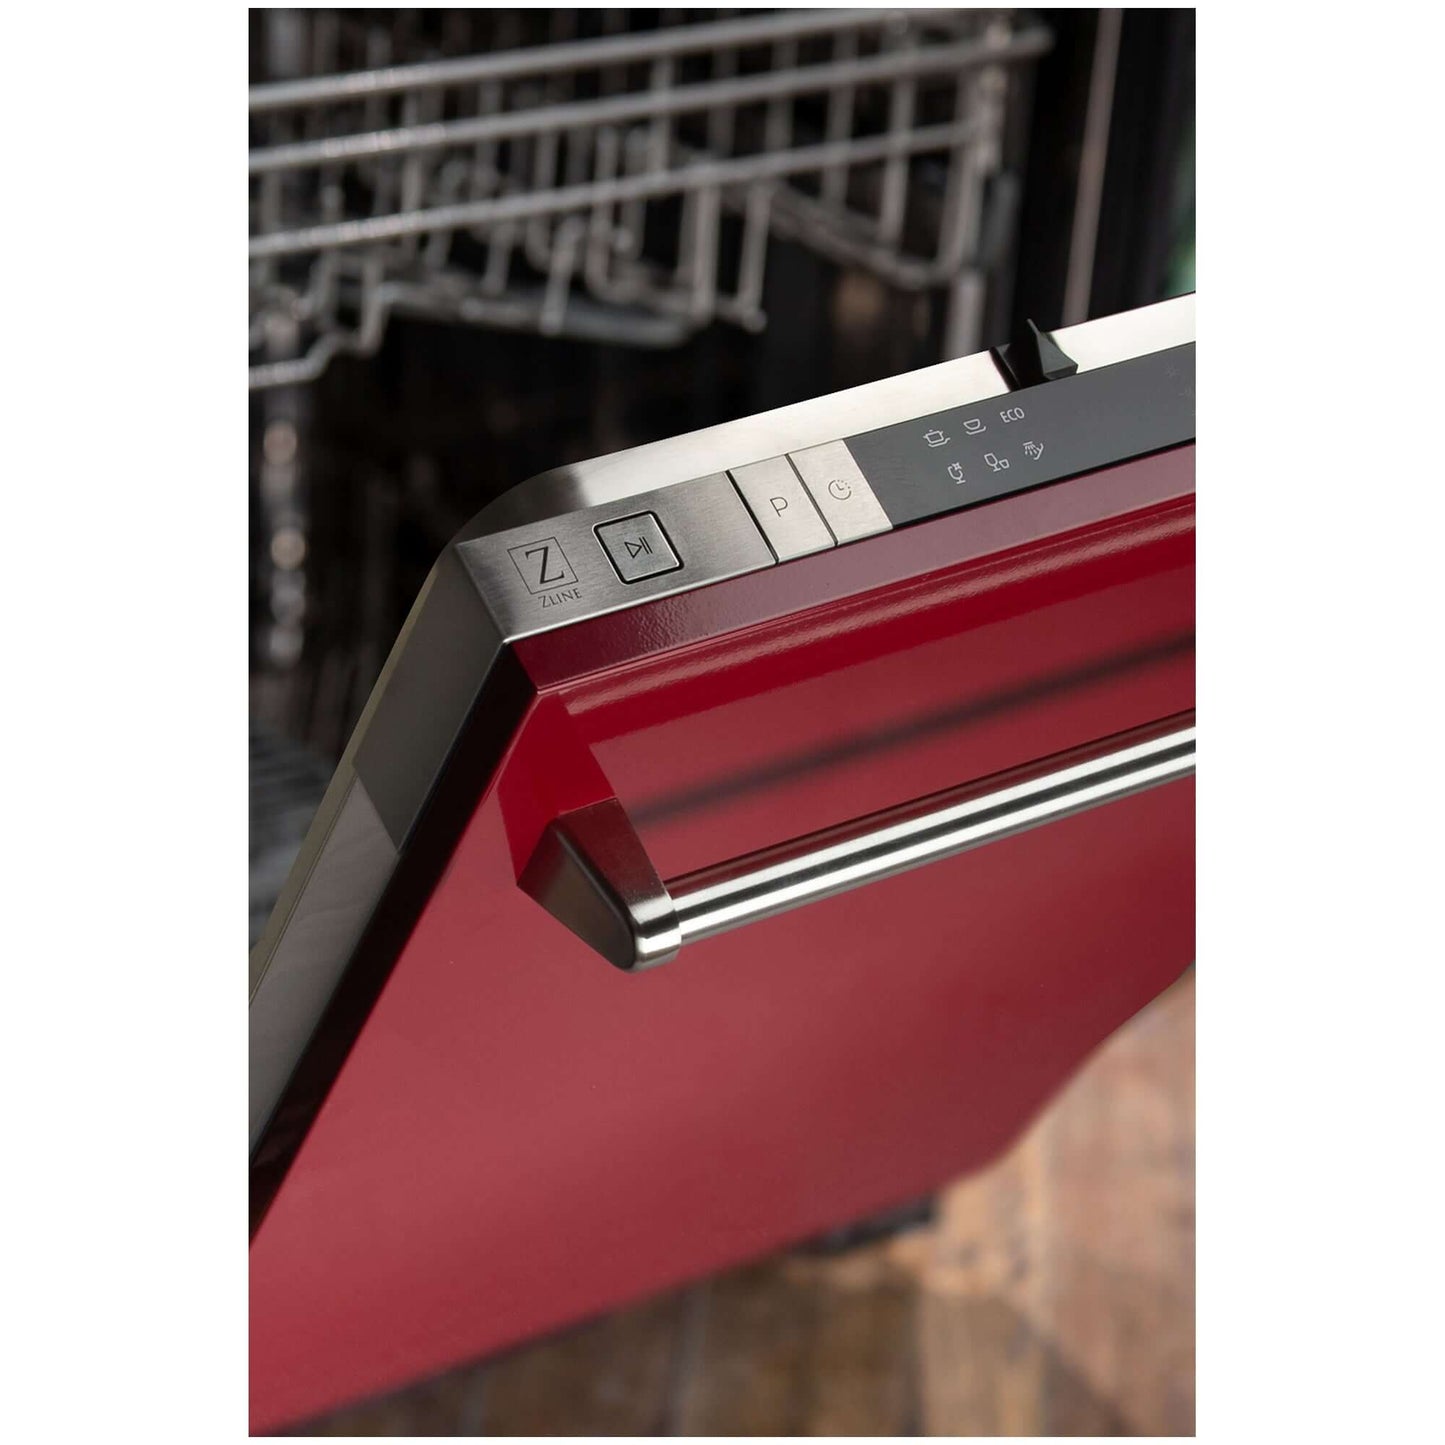 ZLINE 18 in. Compact Top Control Dishwasher with Red Gloss Panel and Traditional Handle, 52dBa (DW-RG-18)